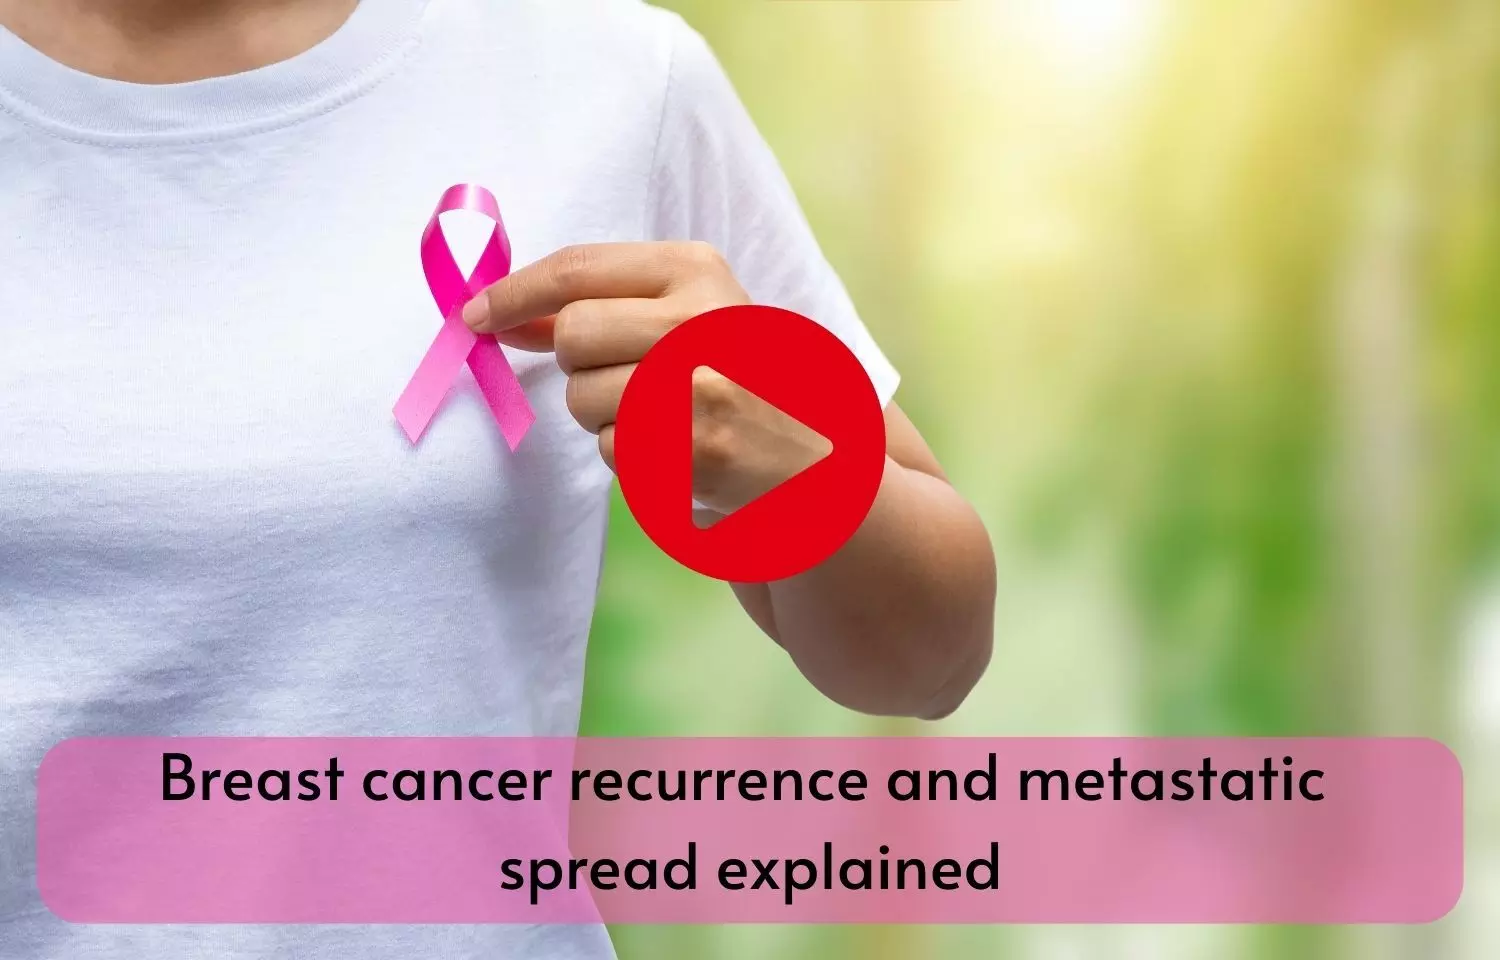 Breast cancer recurrence and metastatic spread explained